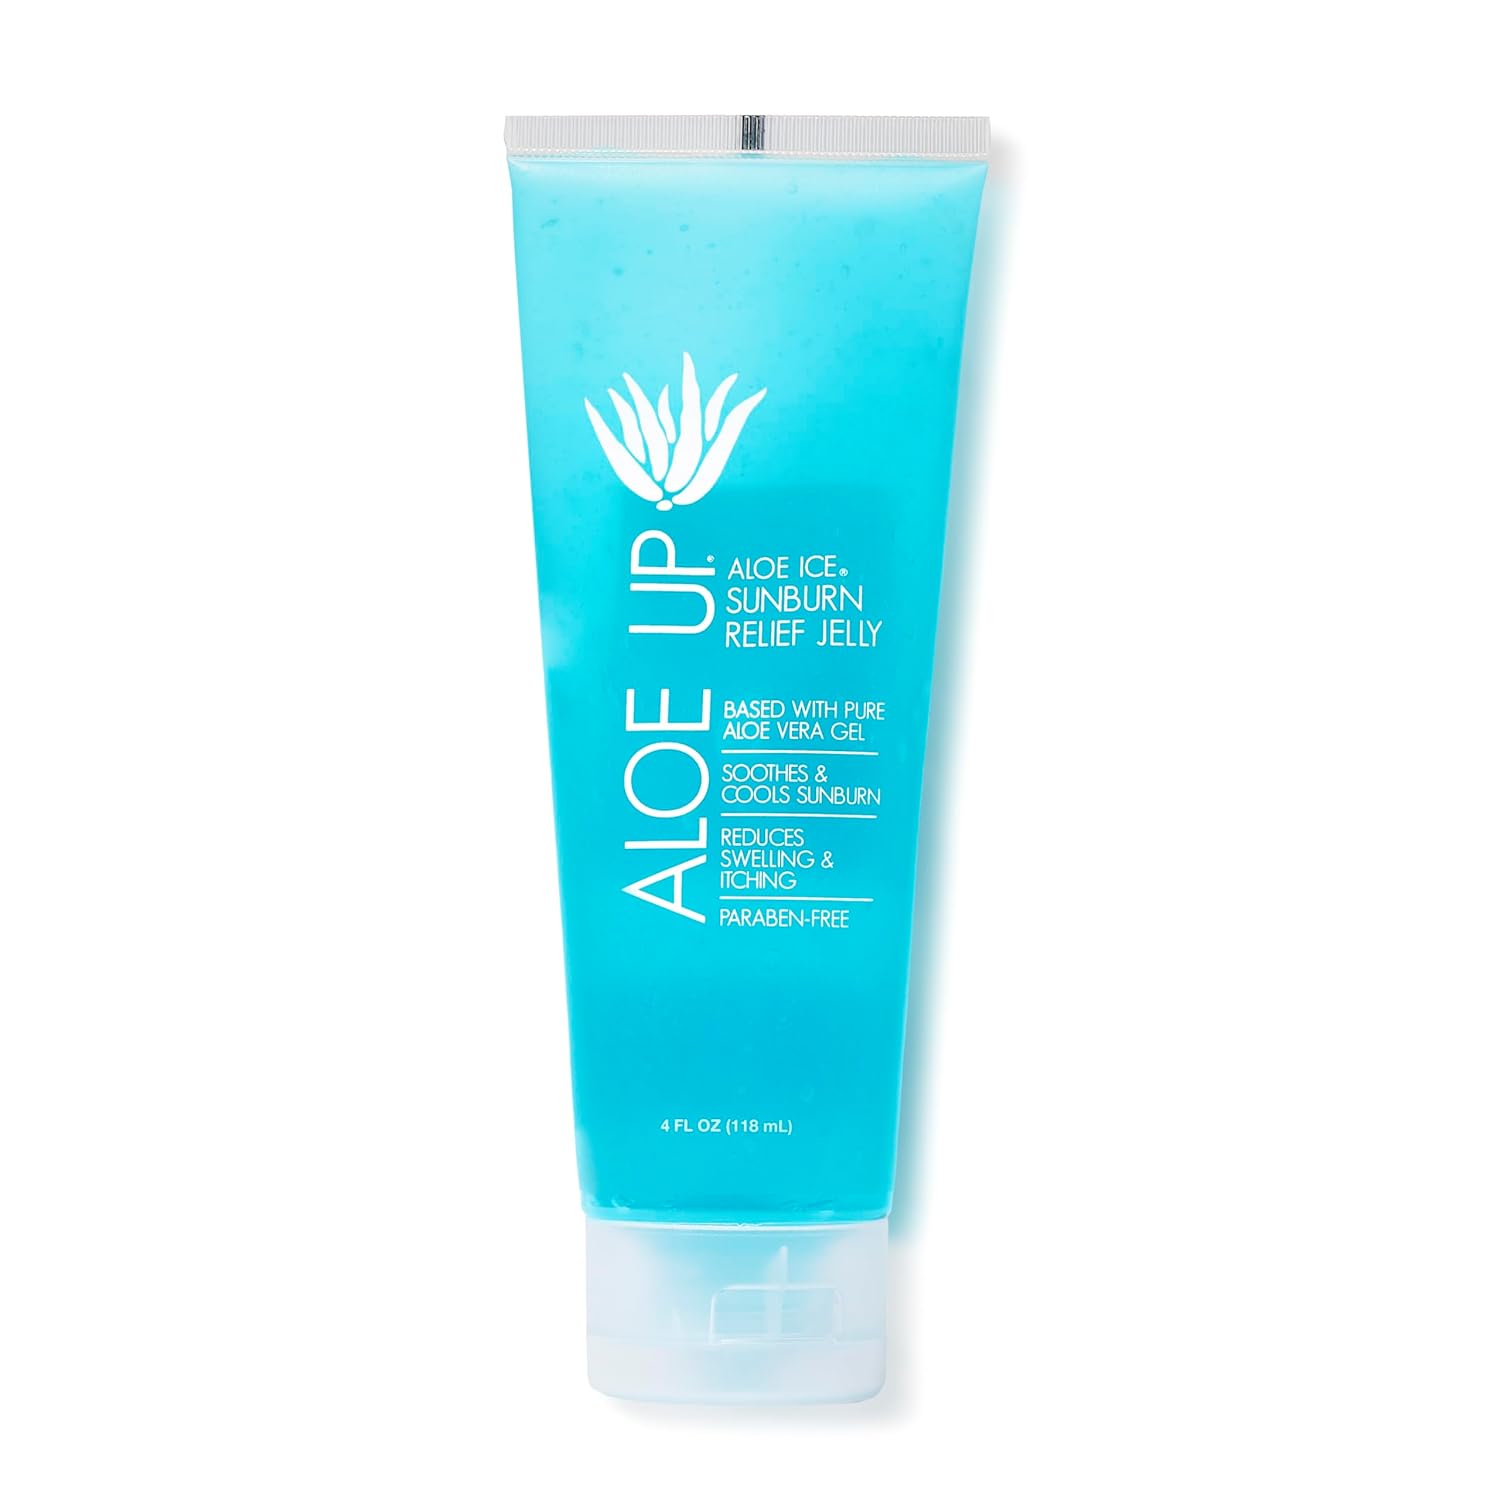 ALOE UP Aloe Ice Sunburn Relief Jelly - Face and Body Organic After Sun Gel - With 96.6% Pure Aloe Vera Gel and 2% Anesthetic Lidocaine - Reef Safe - Alcohol- and Fragrance-Free - 4 Oz